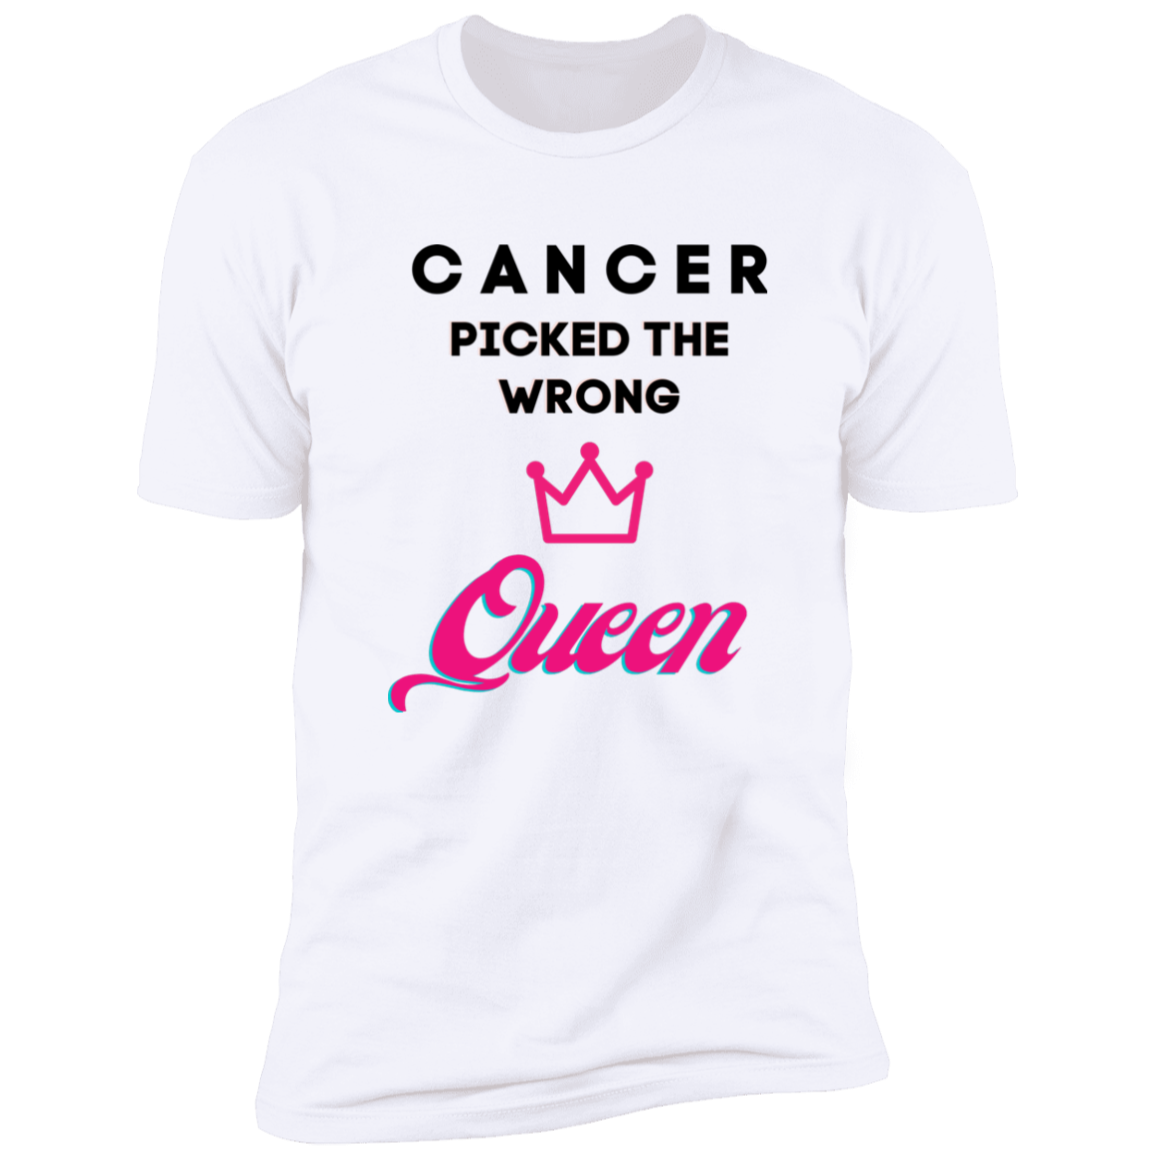 Cancer Picked the Wrong Queen